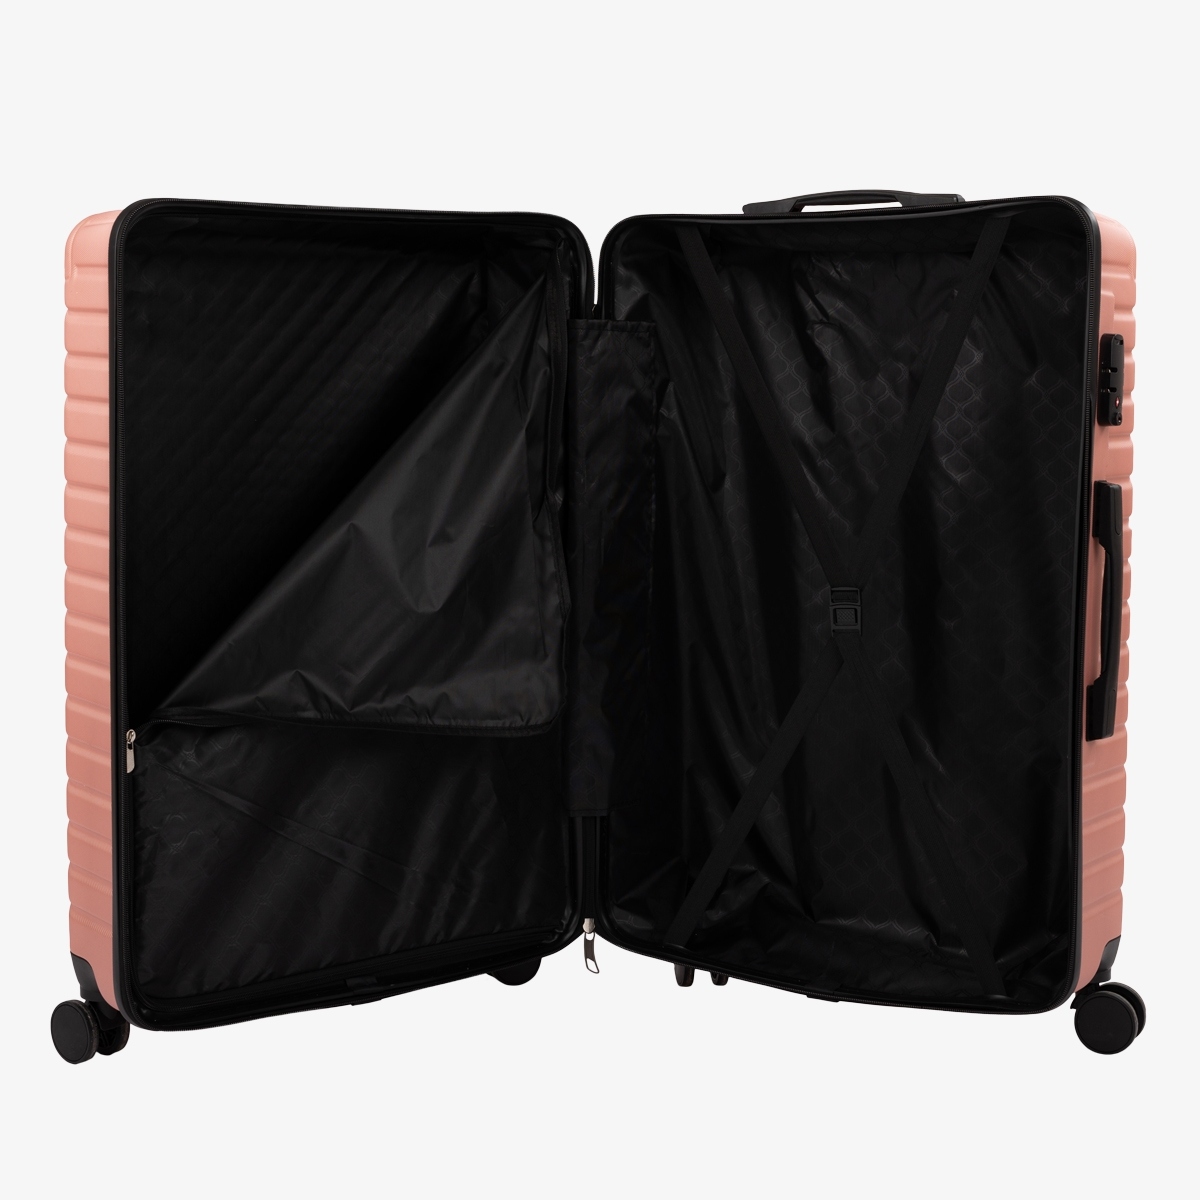 J2C 3 in 1 Hard Suitcase 28 INCH 